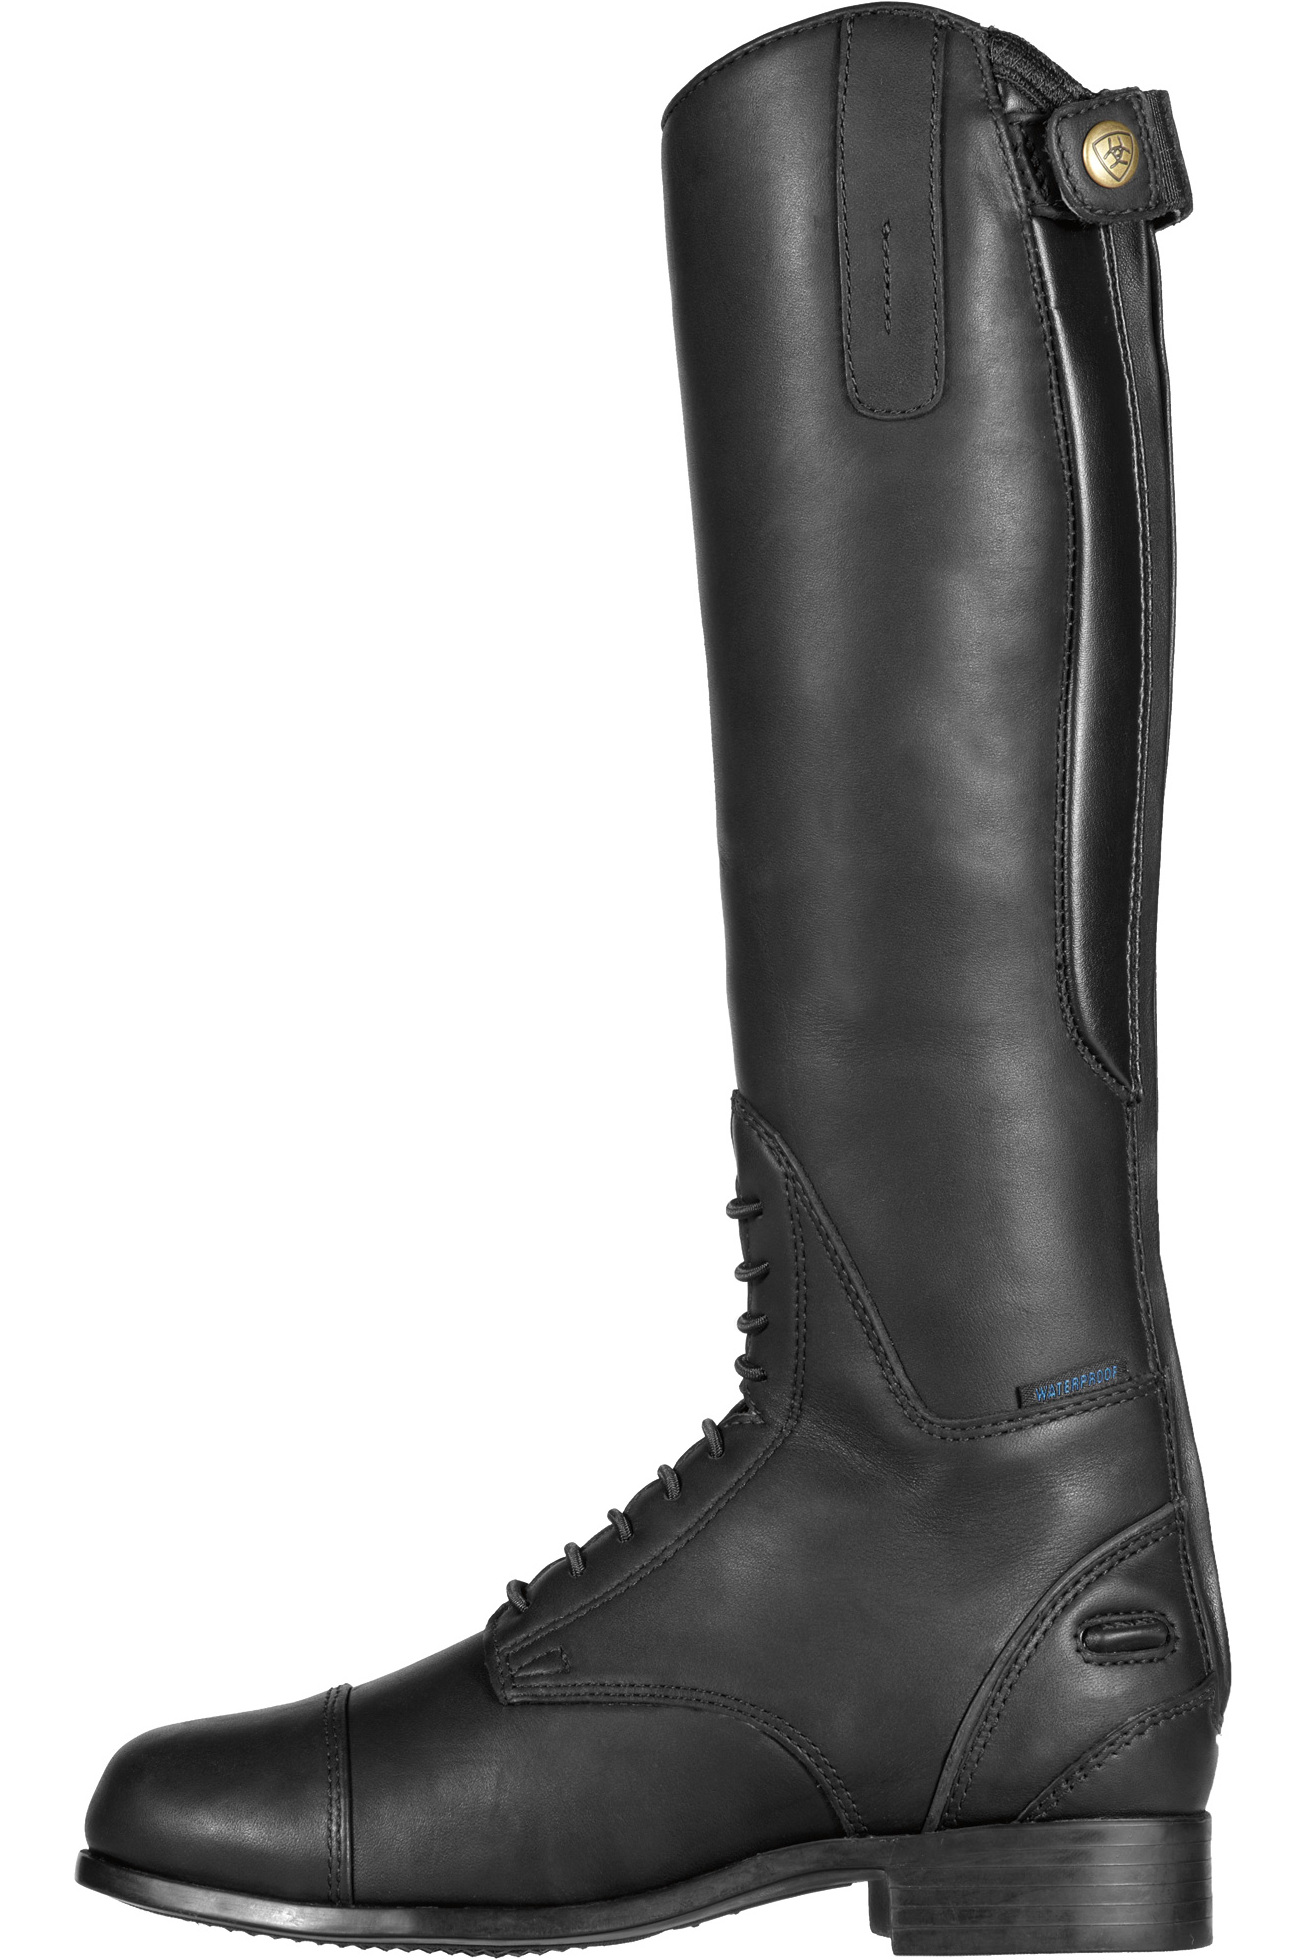 Ariat Childrens Bromont H20 Tall Riding Boots Black The Drillshed